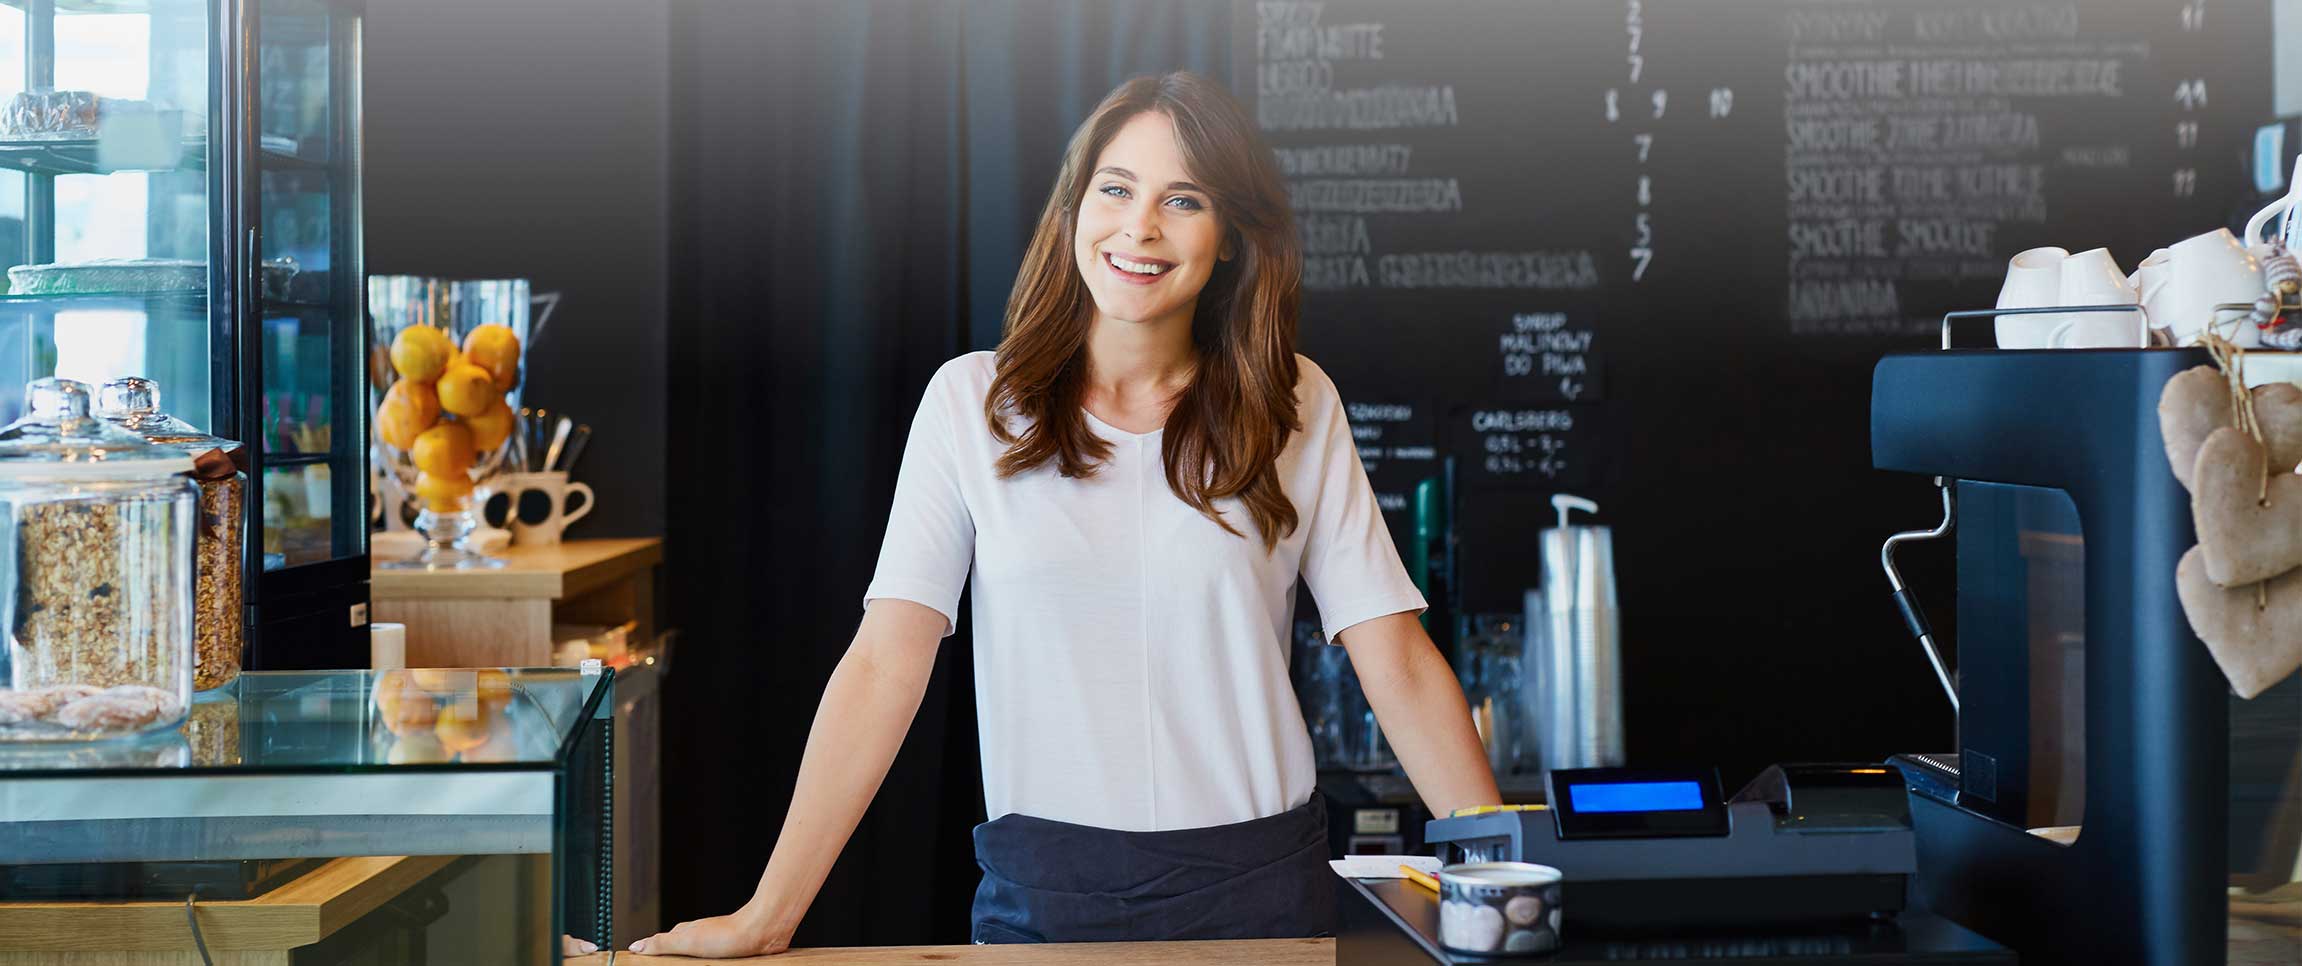 Woman standing at Coffee Shop counter